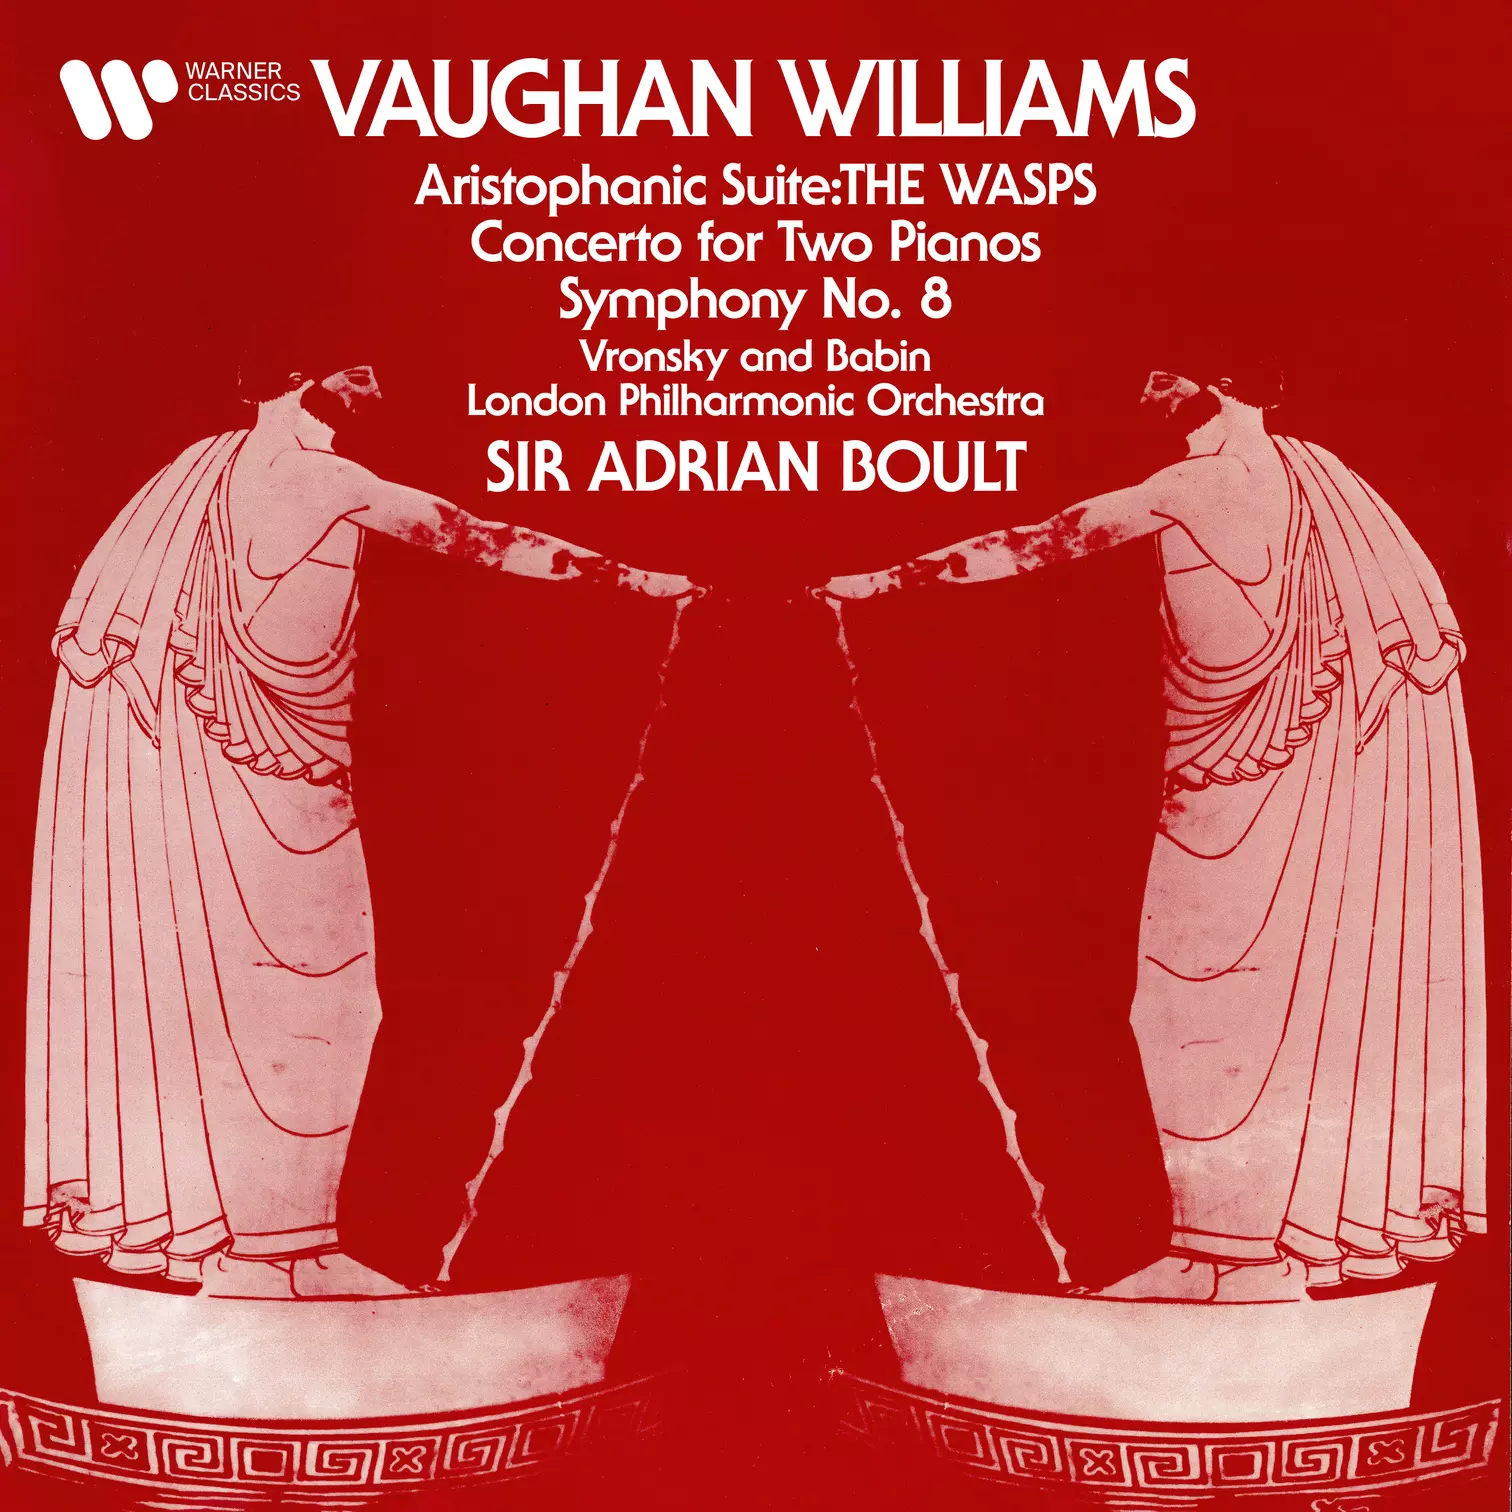 Vaughan Williams: The Wasps, Concerto for Two Pianos & Symphony No. 8